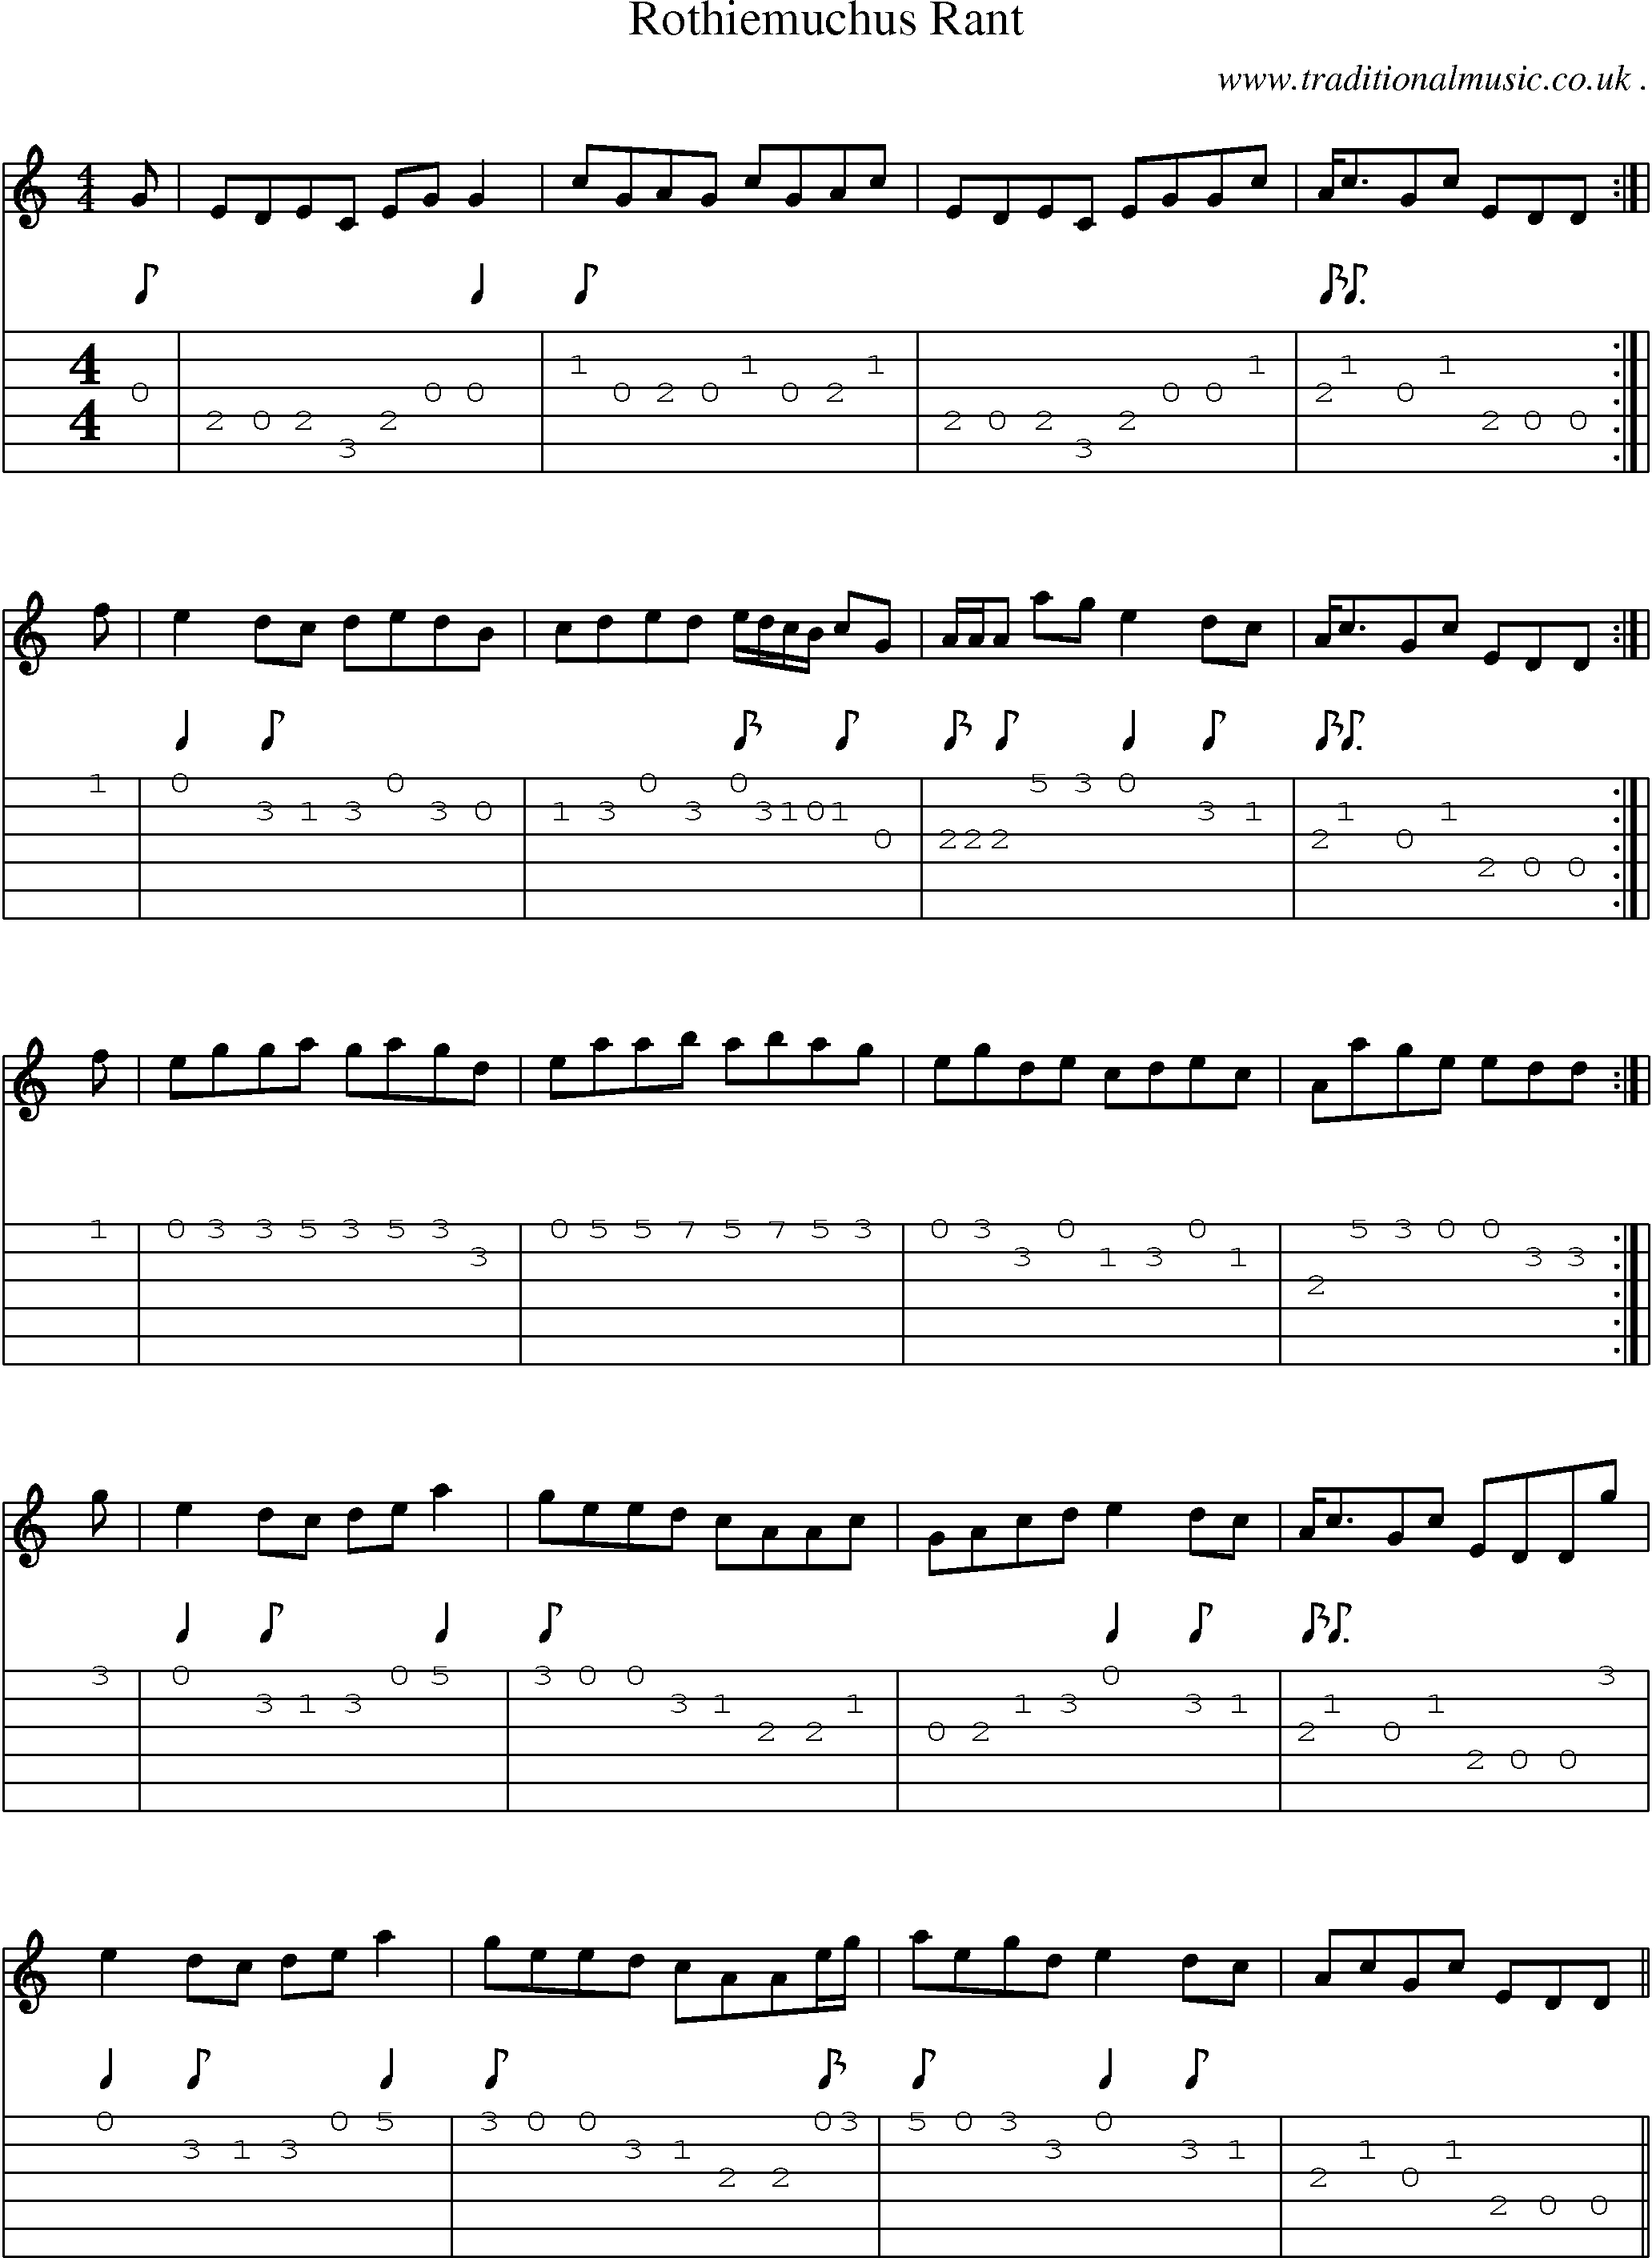 Sheet-Music and Guitar Tabs for Rothiemuchus Rant